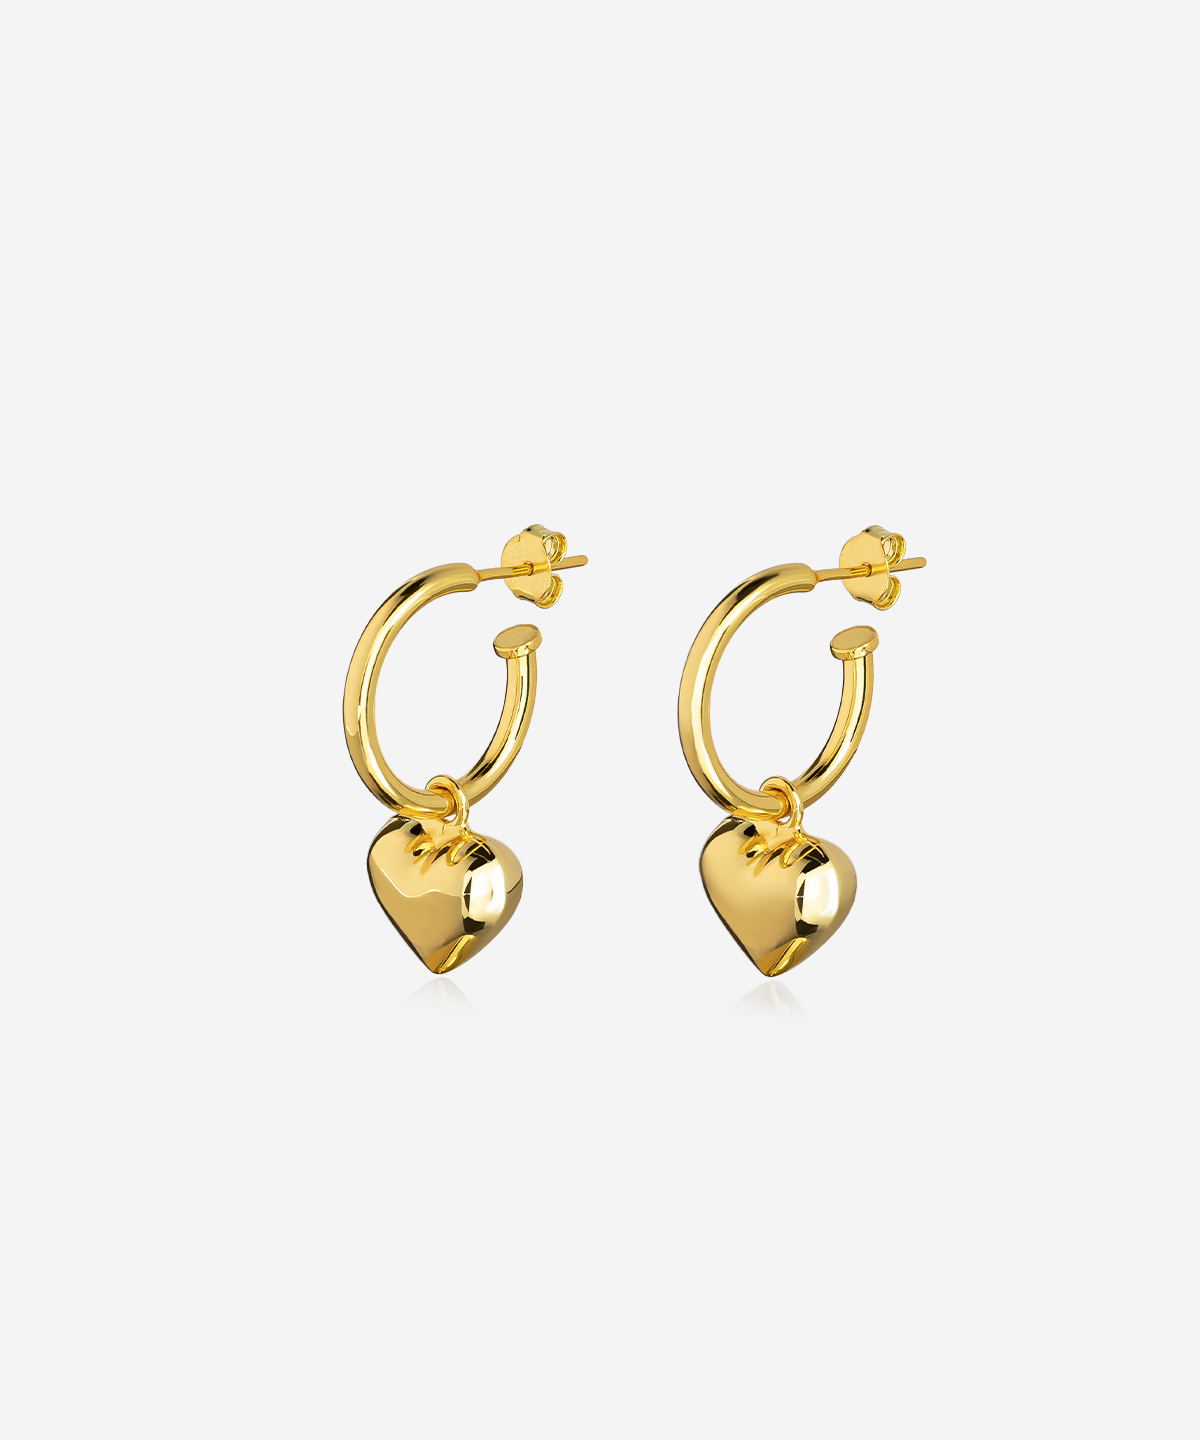 Amore gold-plated earrings